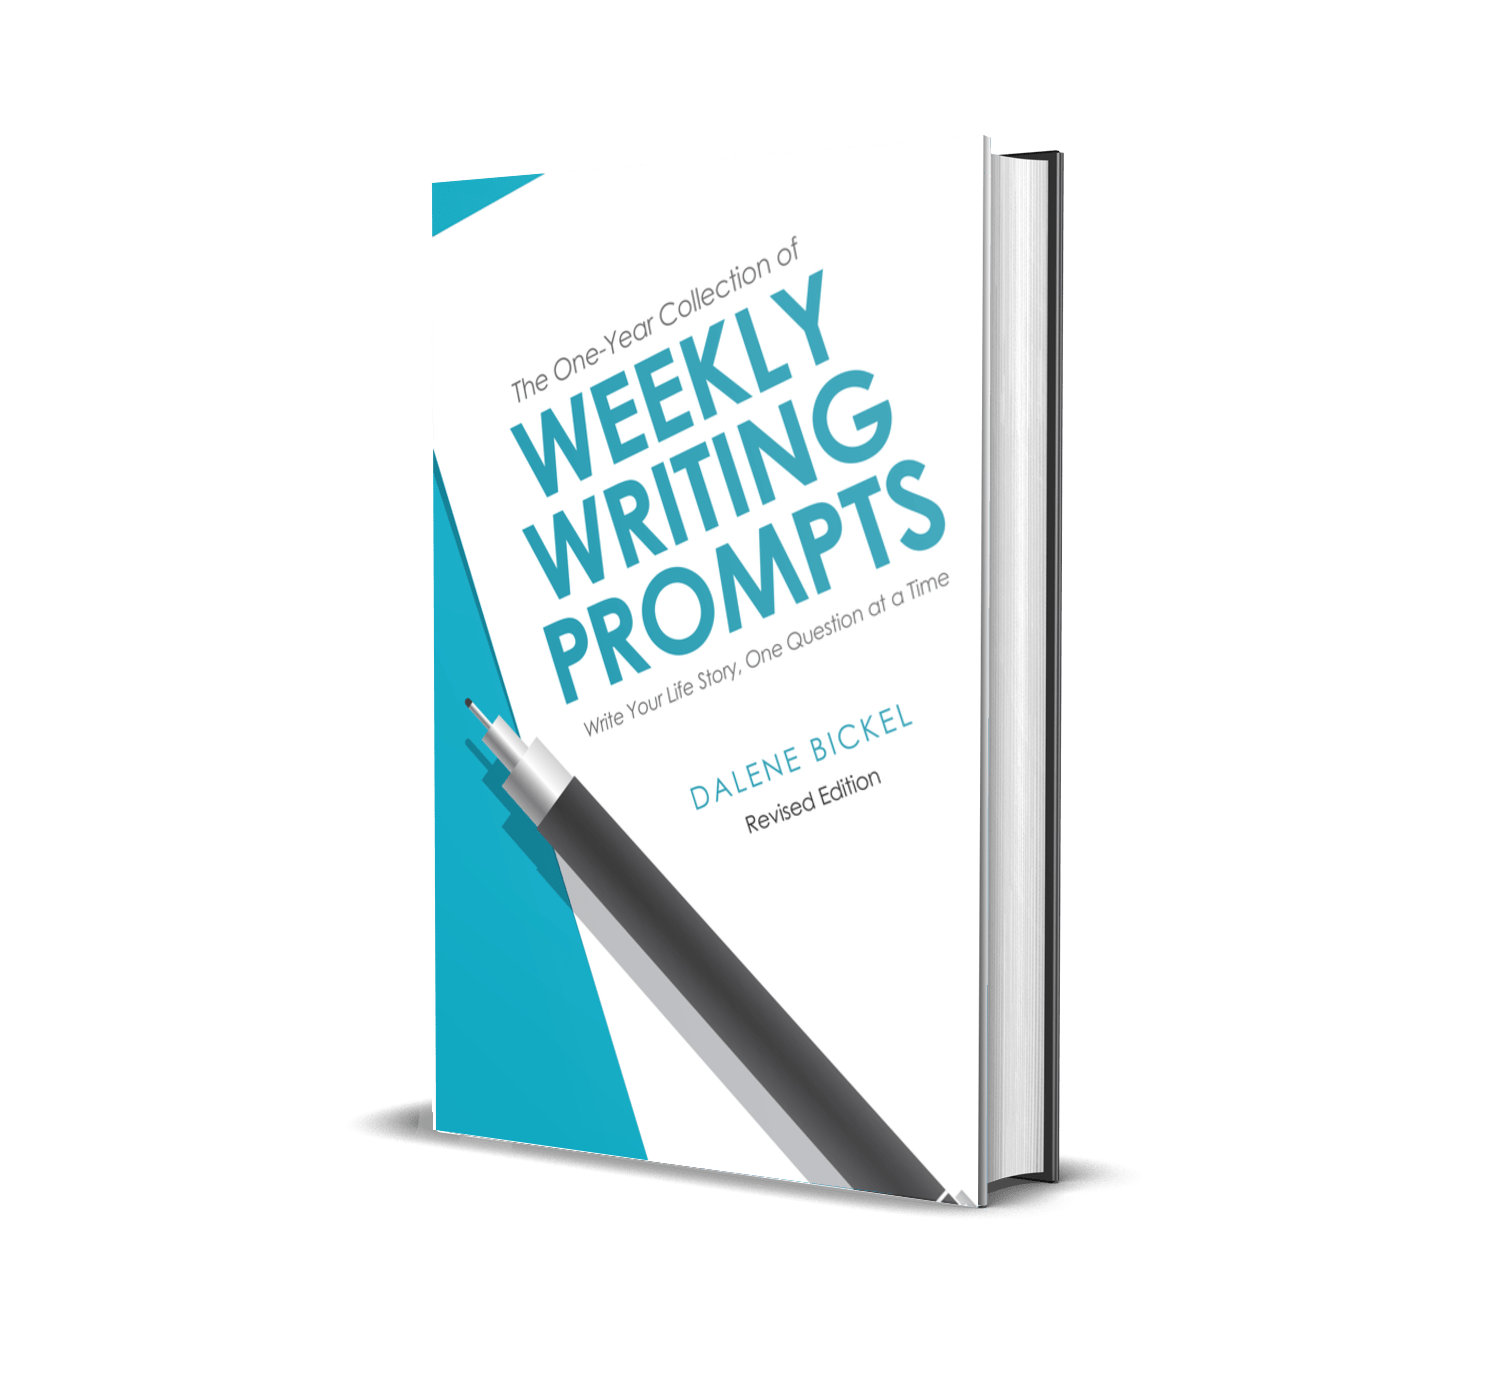 The One-Year Collection of Weekly Writing Prompts